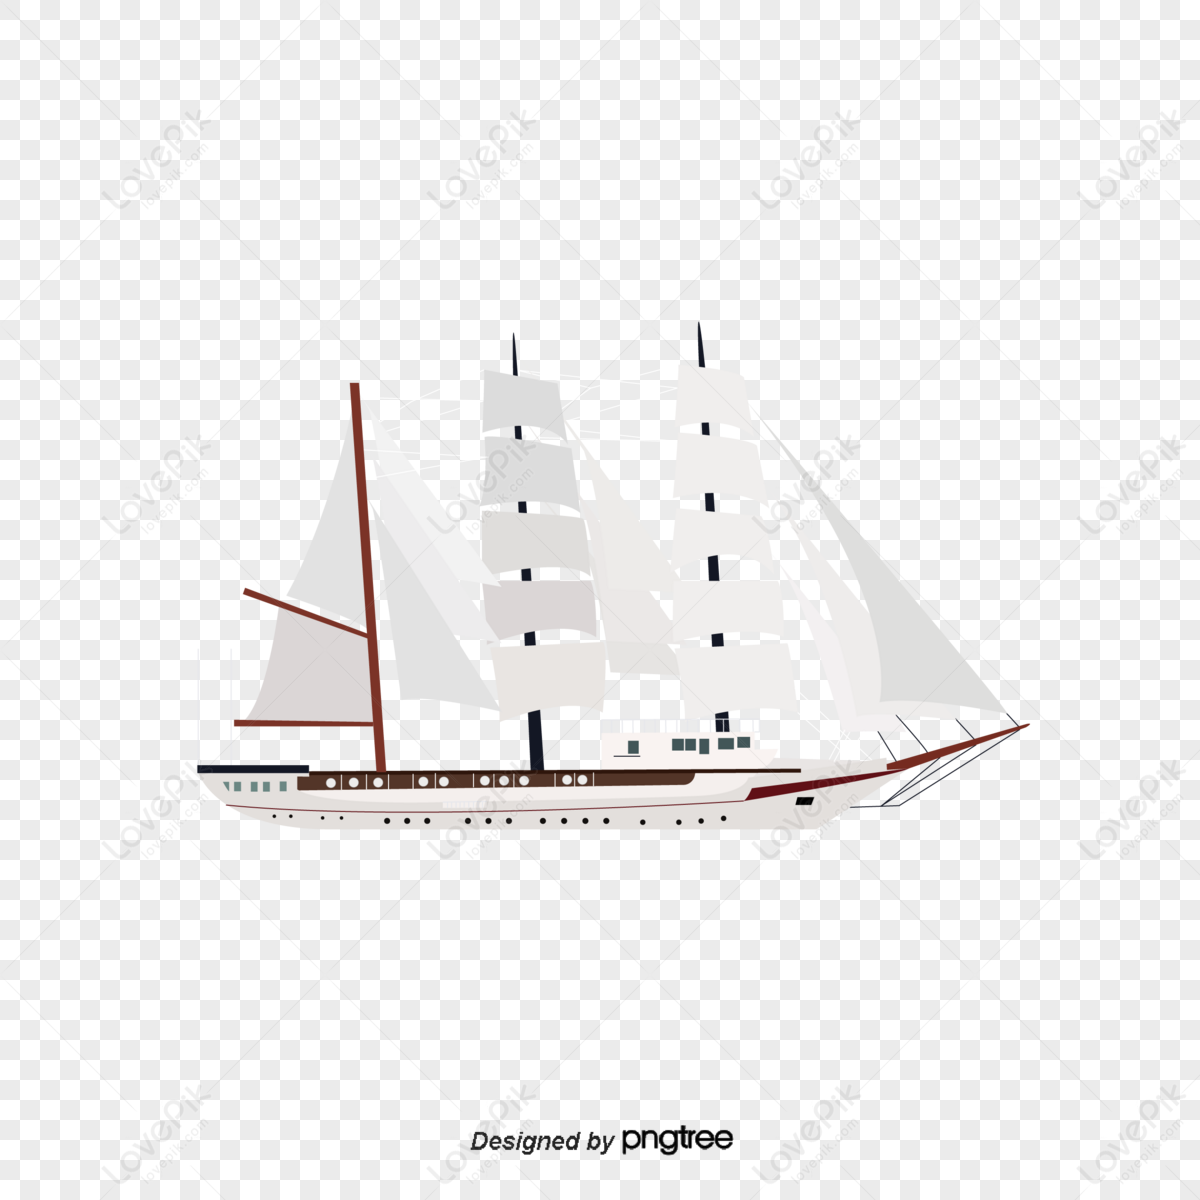 Cartoon-style large sailboat,ocean shipping,means of transport,illustration png transparent image